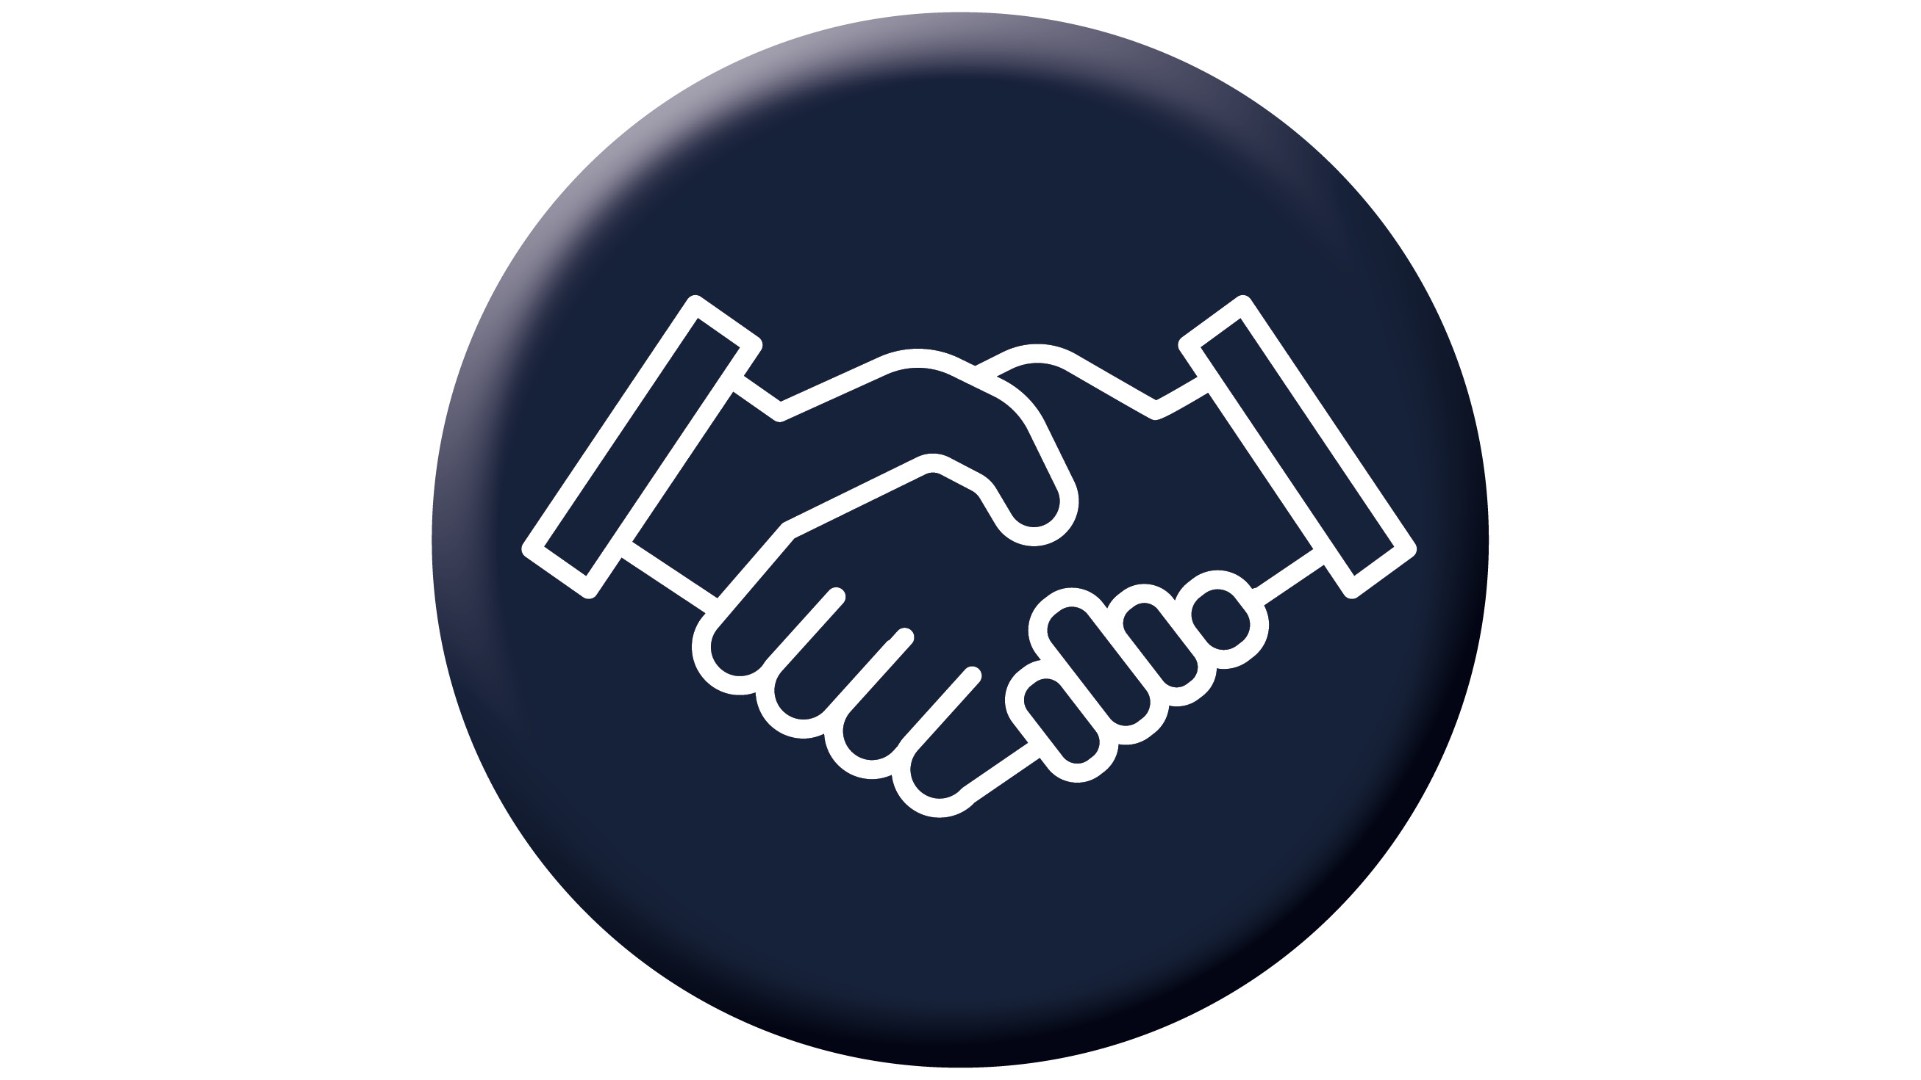 An icon with a handshake stands for contract management solutions in the financial sector